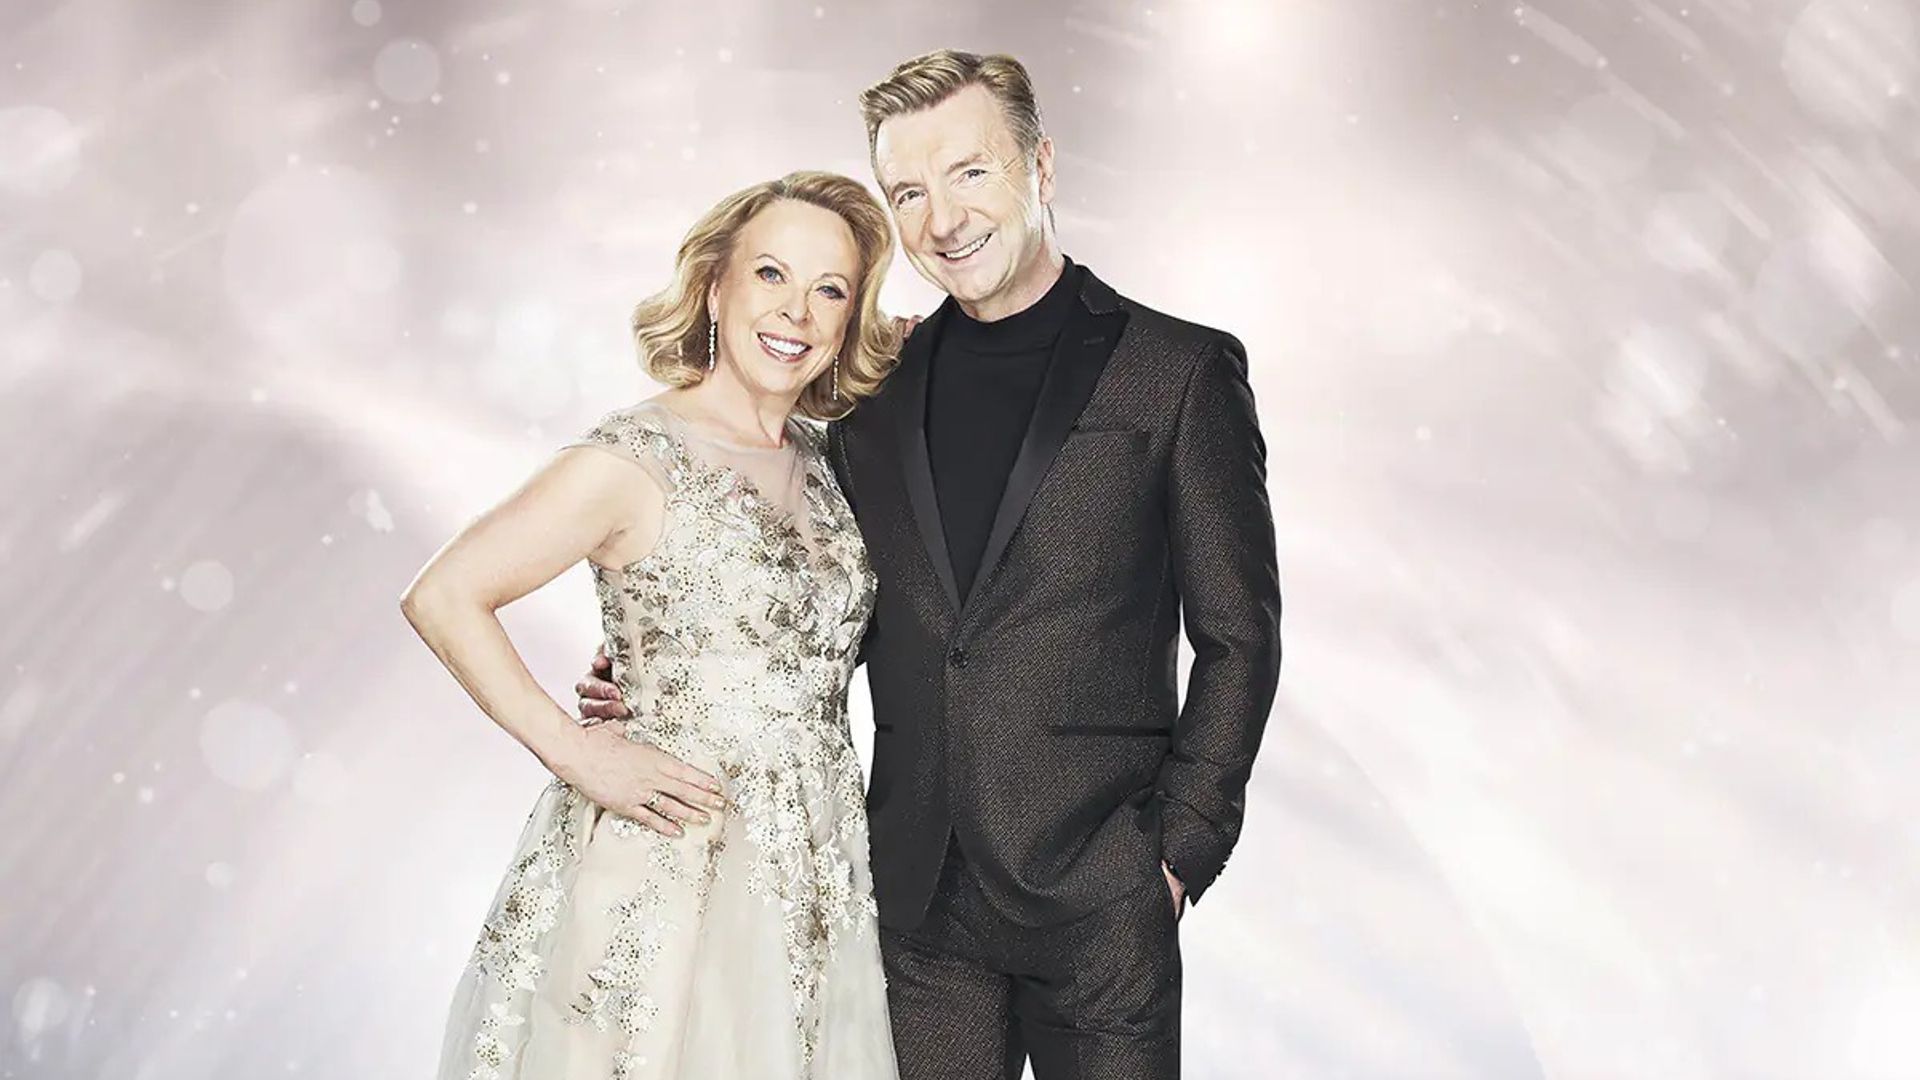 Torvill and Dean: six facts about the Dancing on Ice judge duo